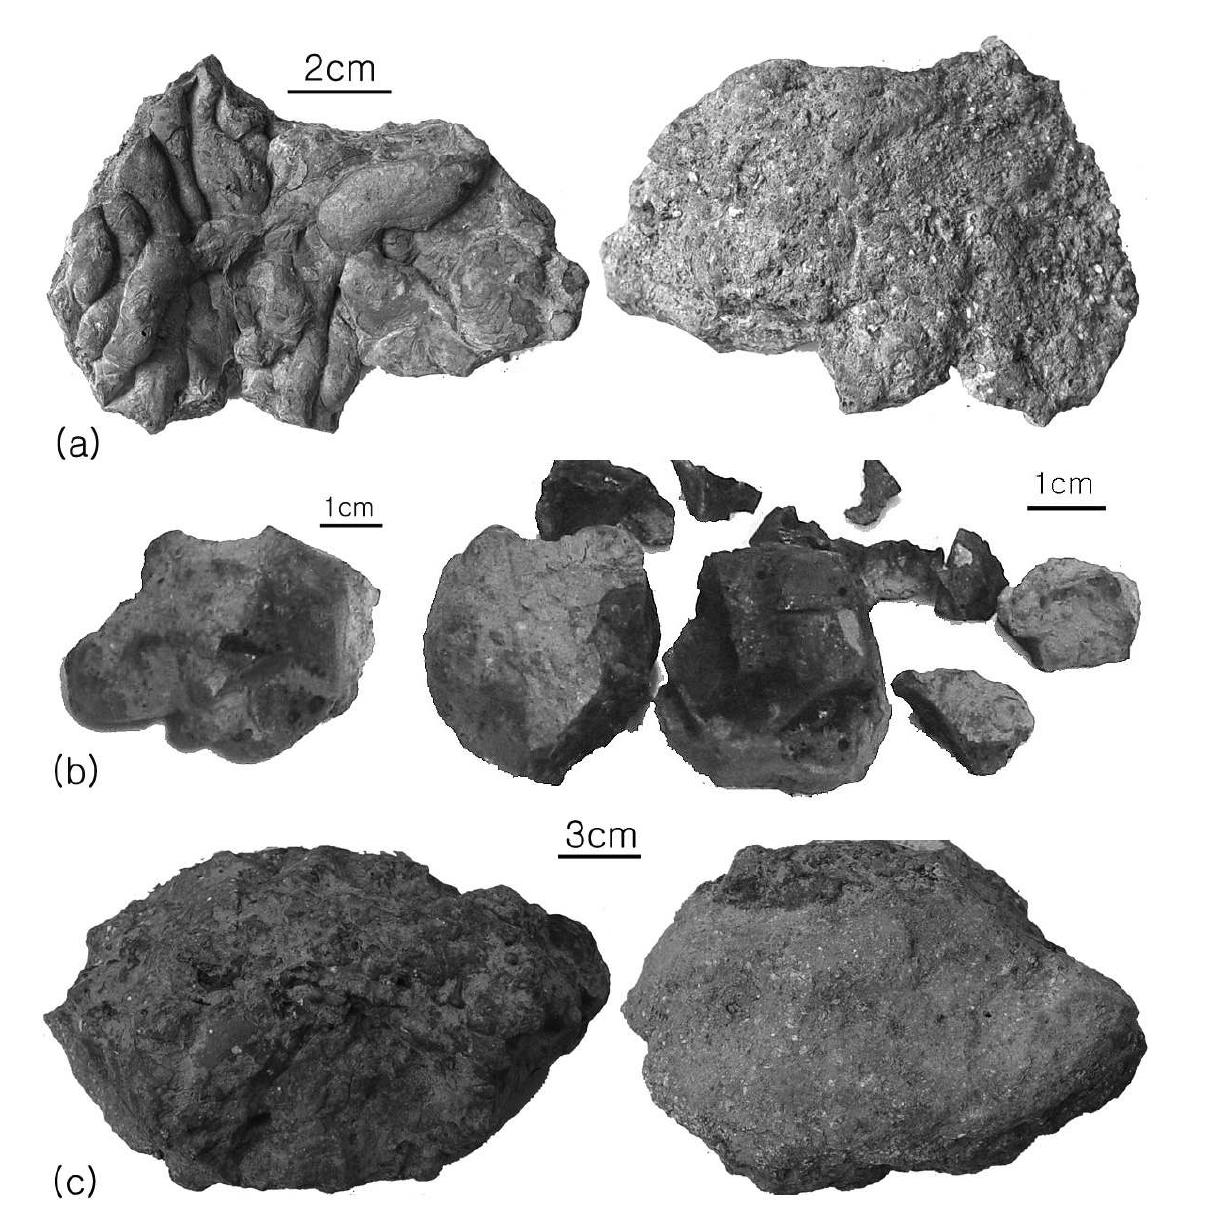 General appearances of slag objects examined. (a) Curved plate witha ropy top (left) and a sandy curved bottom (right), (b) Small irregular block before (left) and after (right) disintegration, (c) Large chunk with an irregular top (left) and a sandy bottom (right).